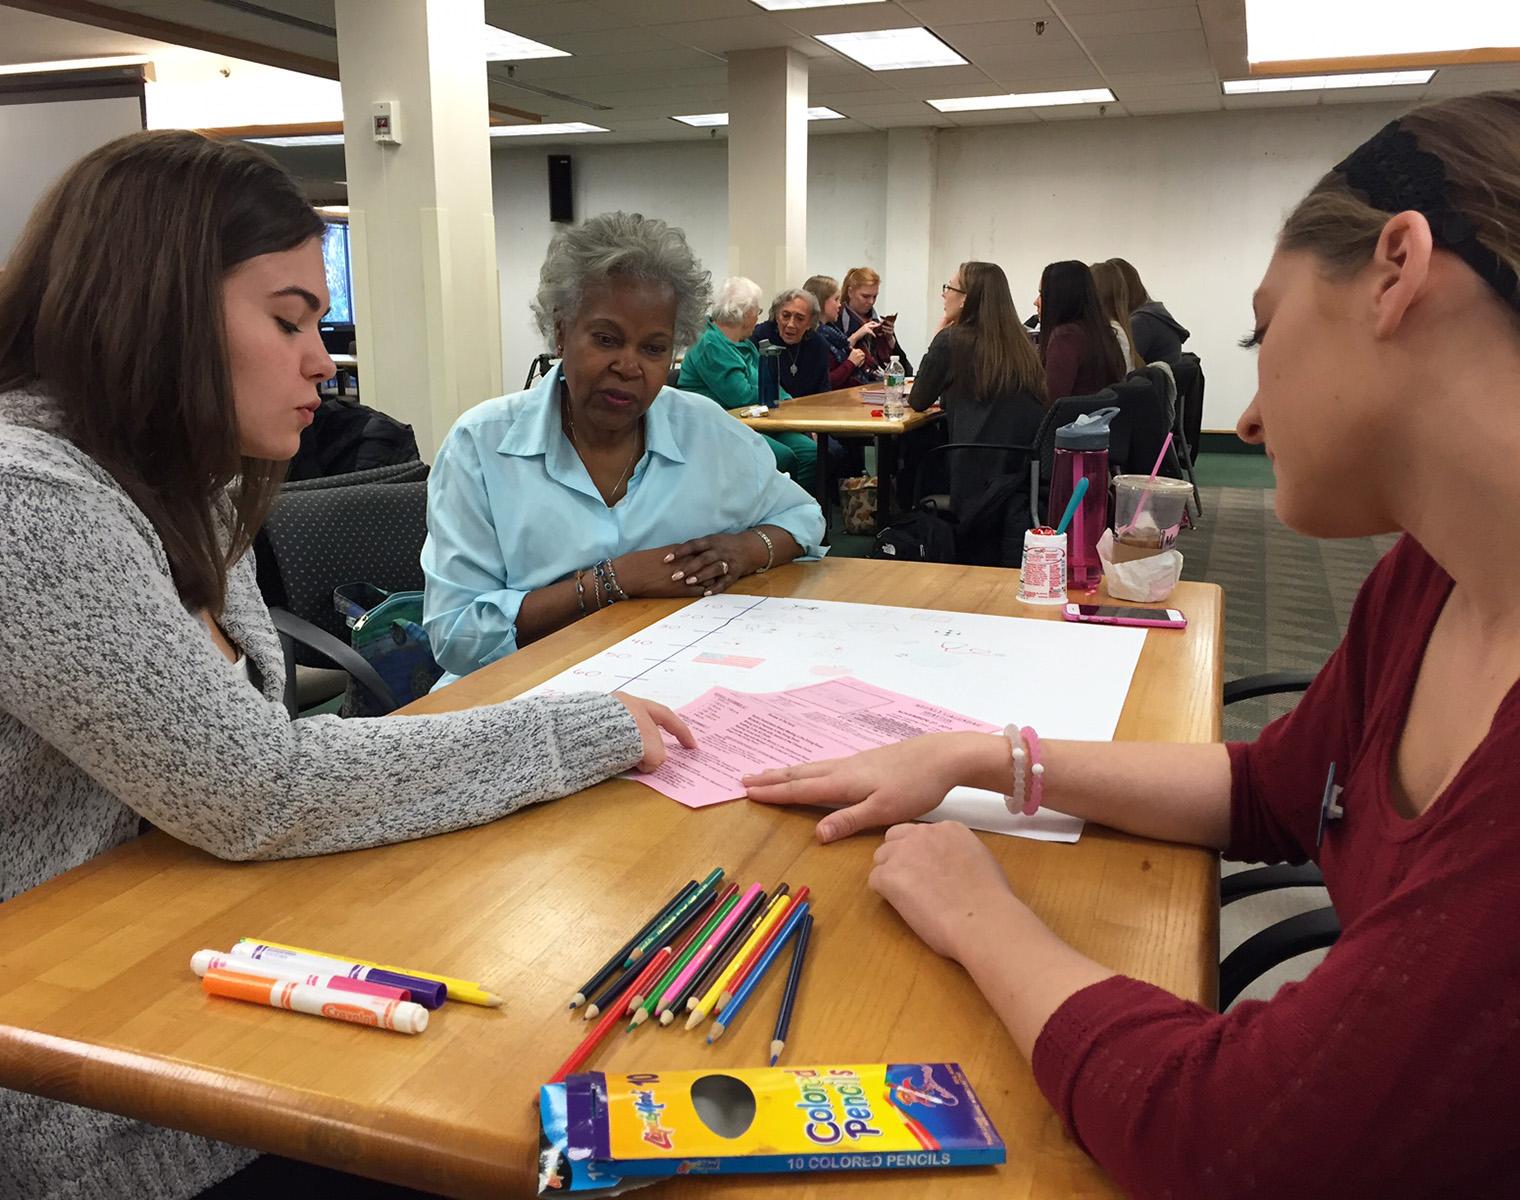 Two young women, who are nursing students, sit at a table with an older woman. They have papers, colored pencils, and markers and are engaged in an activity.